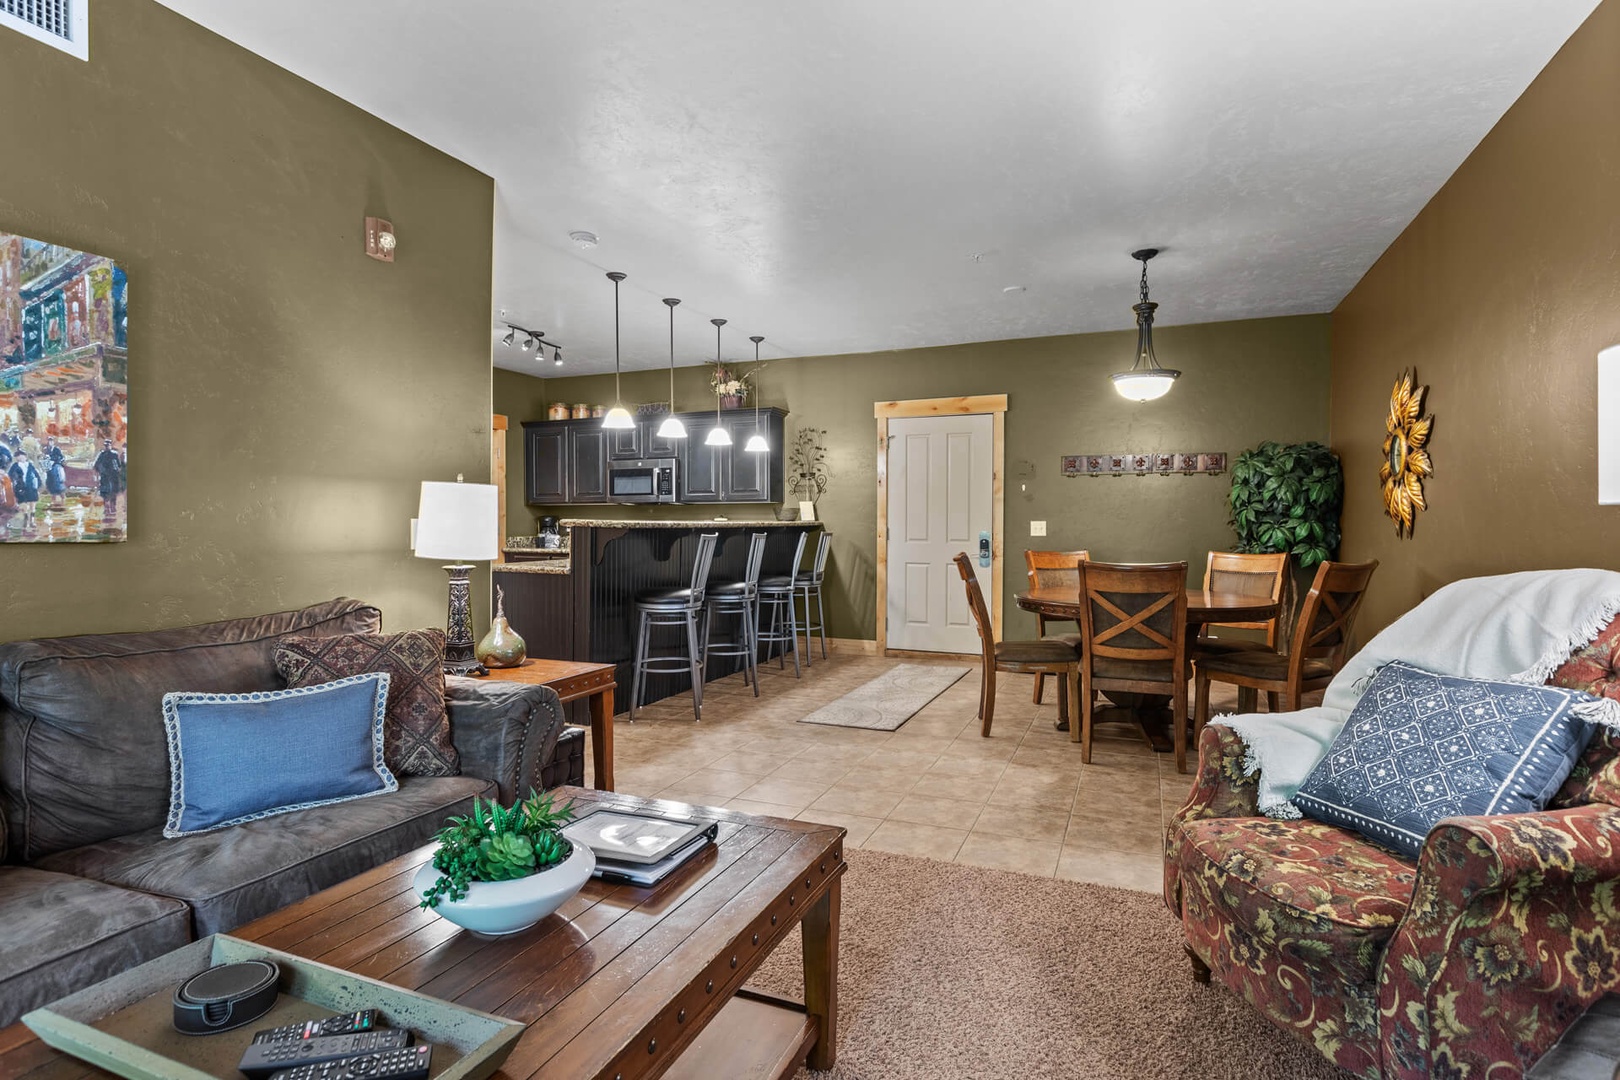 Bear Hollow Lodges 4201: Gathering and entertaining is welcome with the open floor plan offering plenty of seating, tables for eating and games and easy kitchen access.